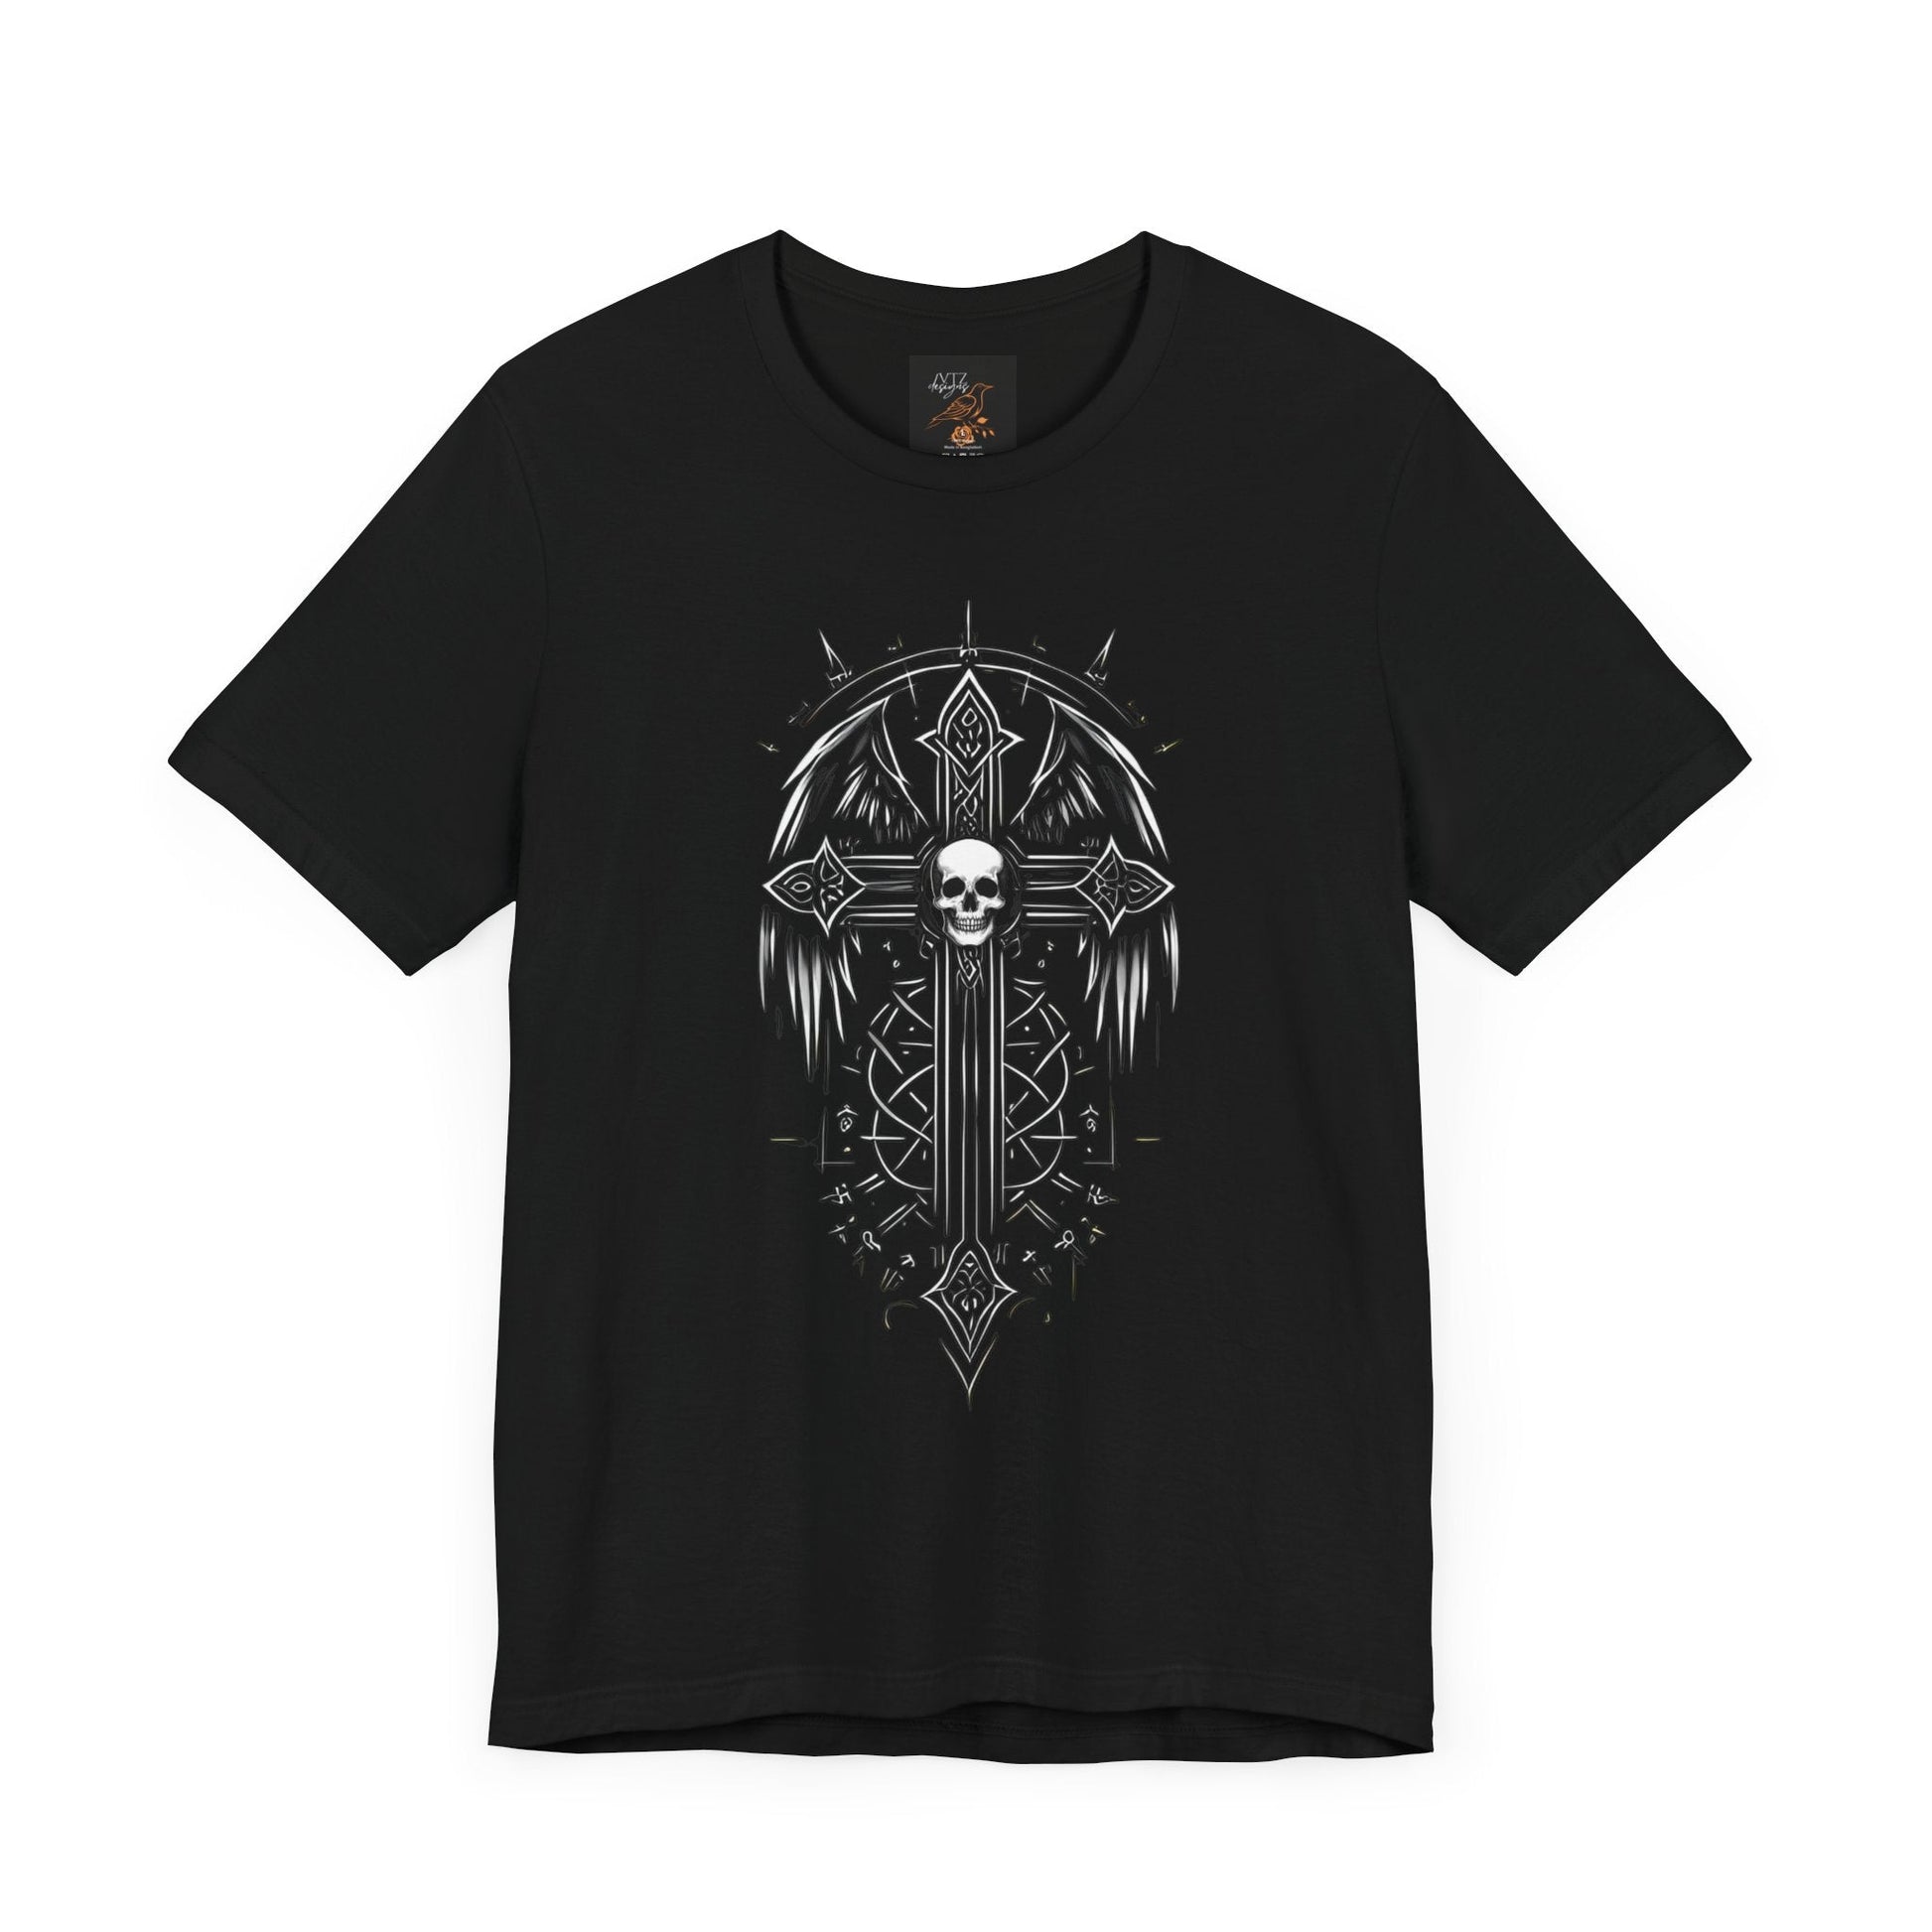 Gothic Cross With Skull and Wings Tee ShirtT - ShirtVTZdesignsBlackXSclothesclothingCotton